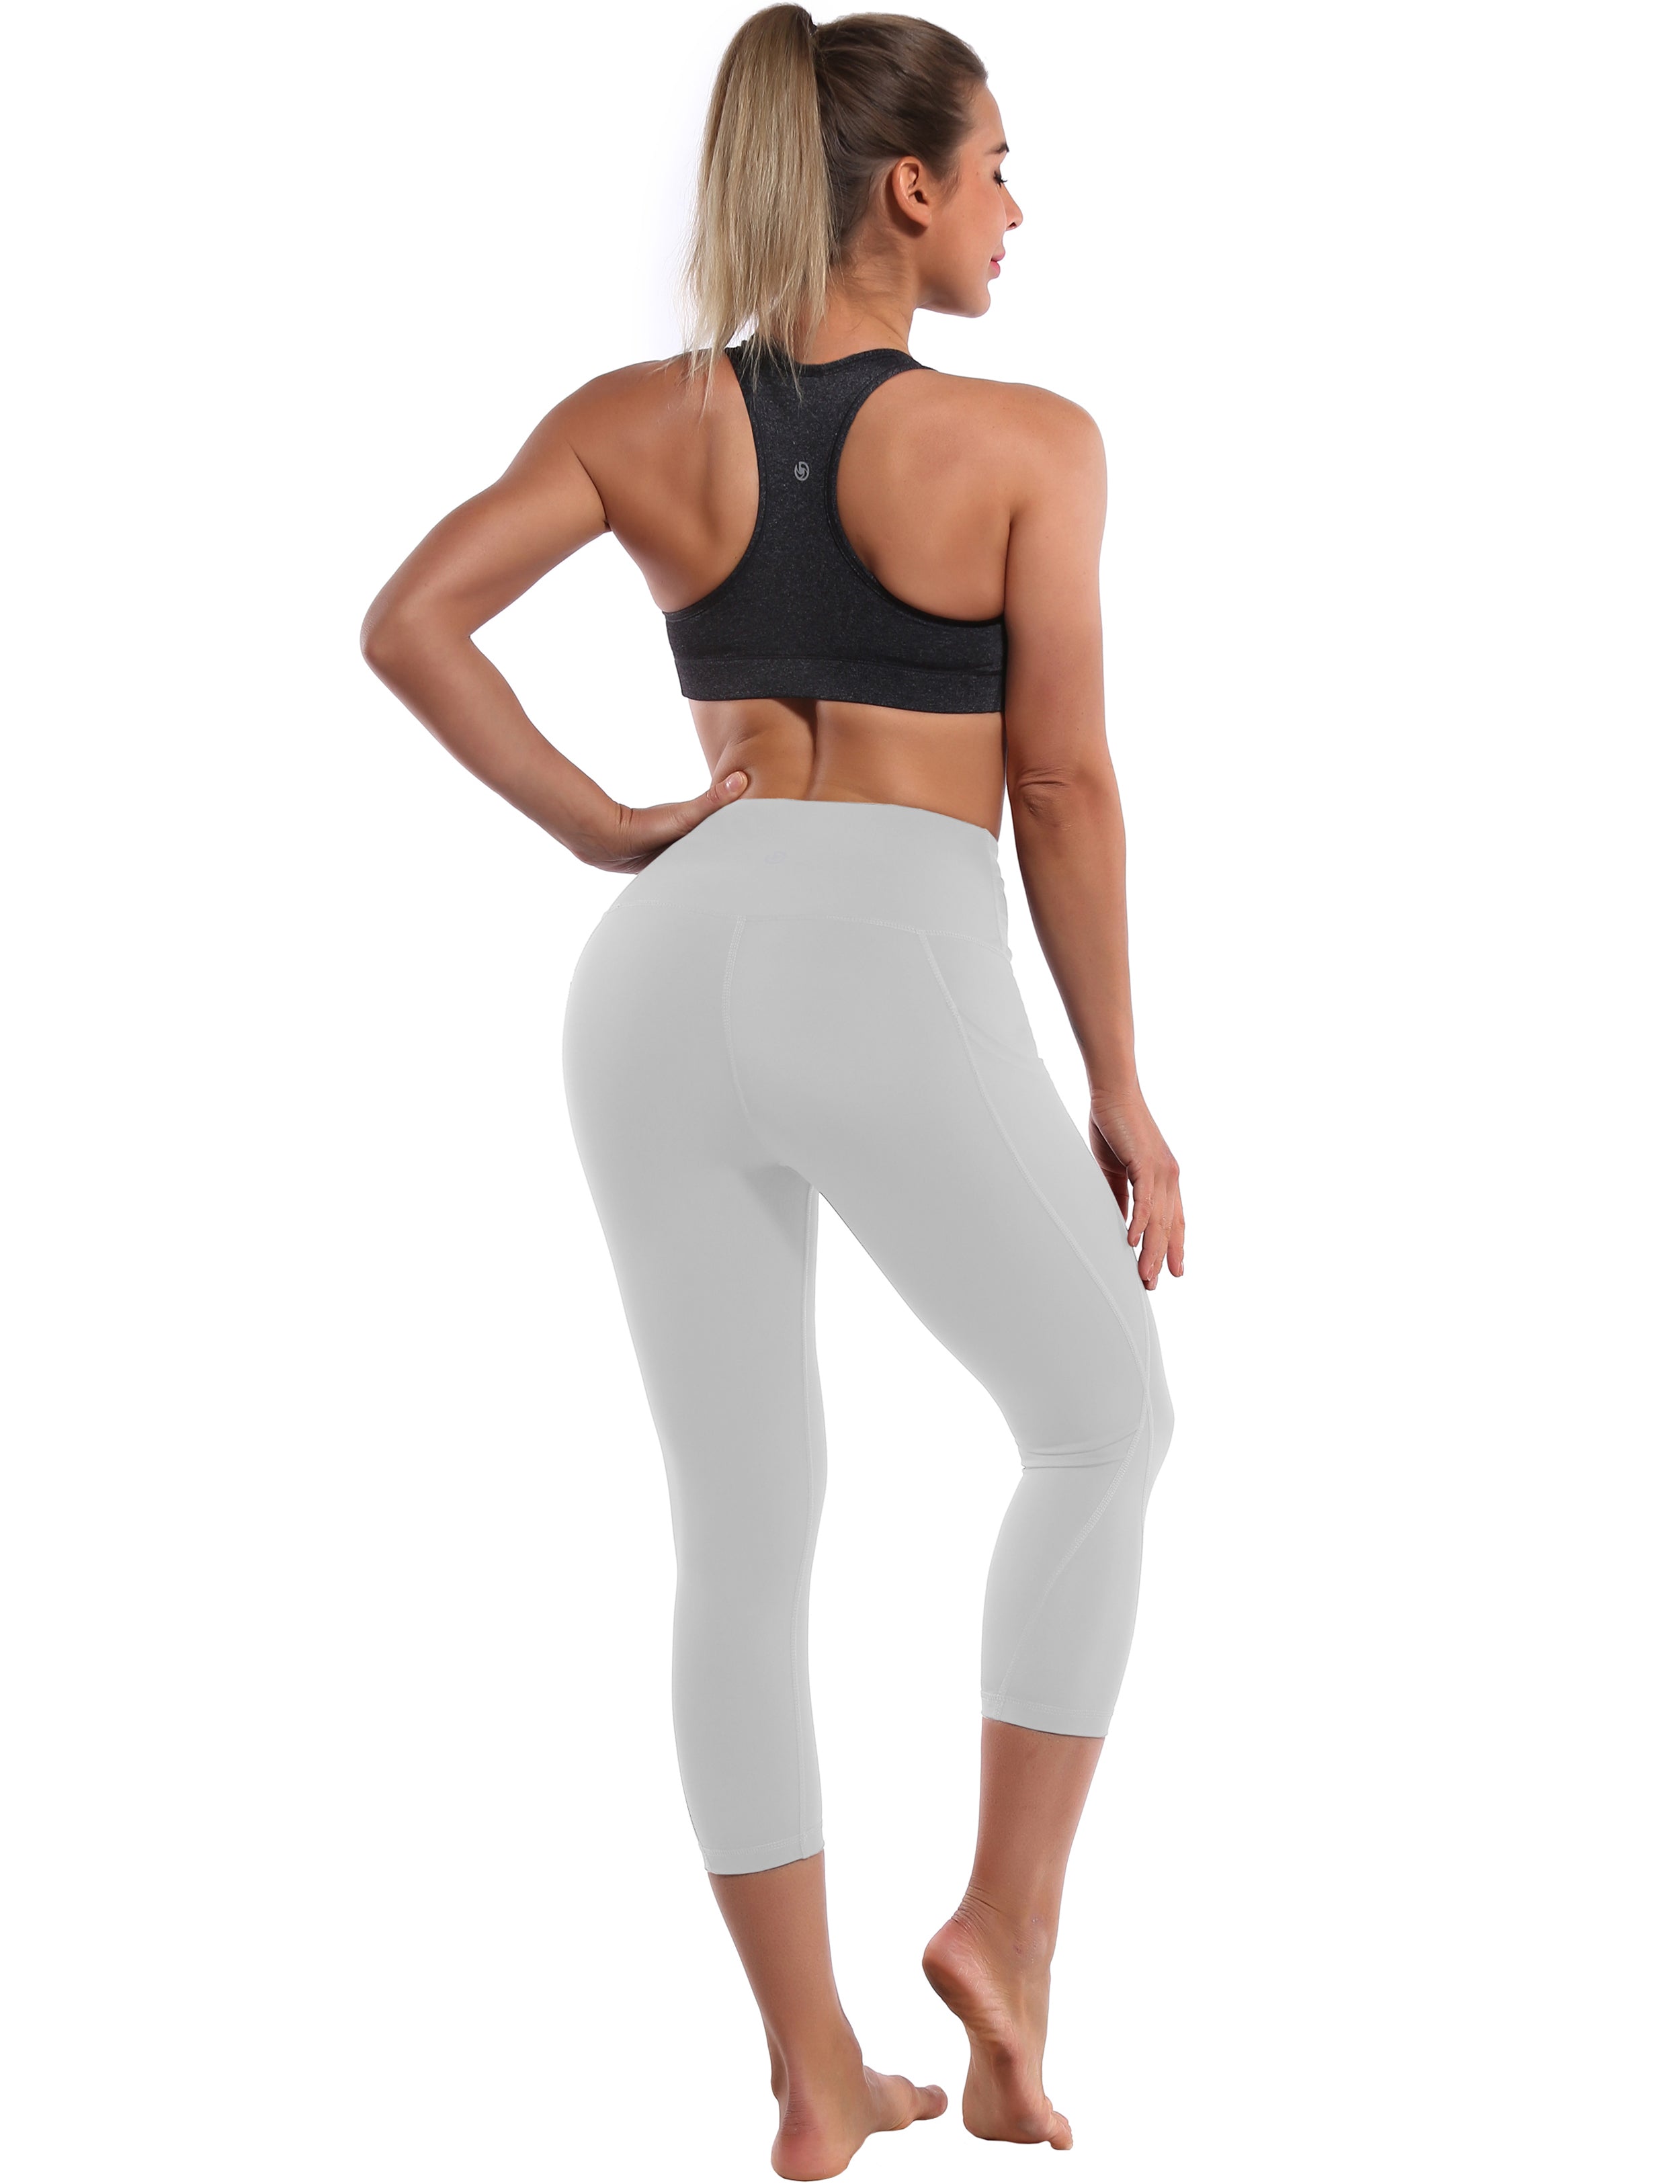 19" High Waist Side Pockets Capris lightgray 75%Nylon/25%Spandex Fabric doesn't attract lint easily 4-way stretch No see-through Moisture-wicking Tummy control Inner pocket